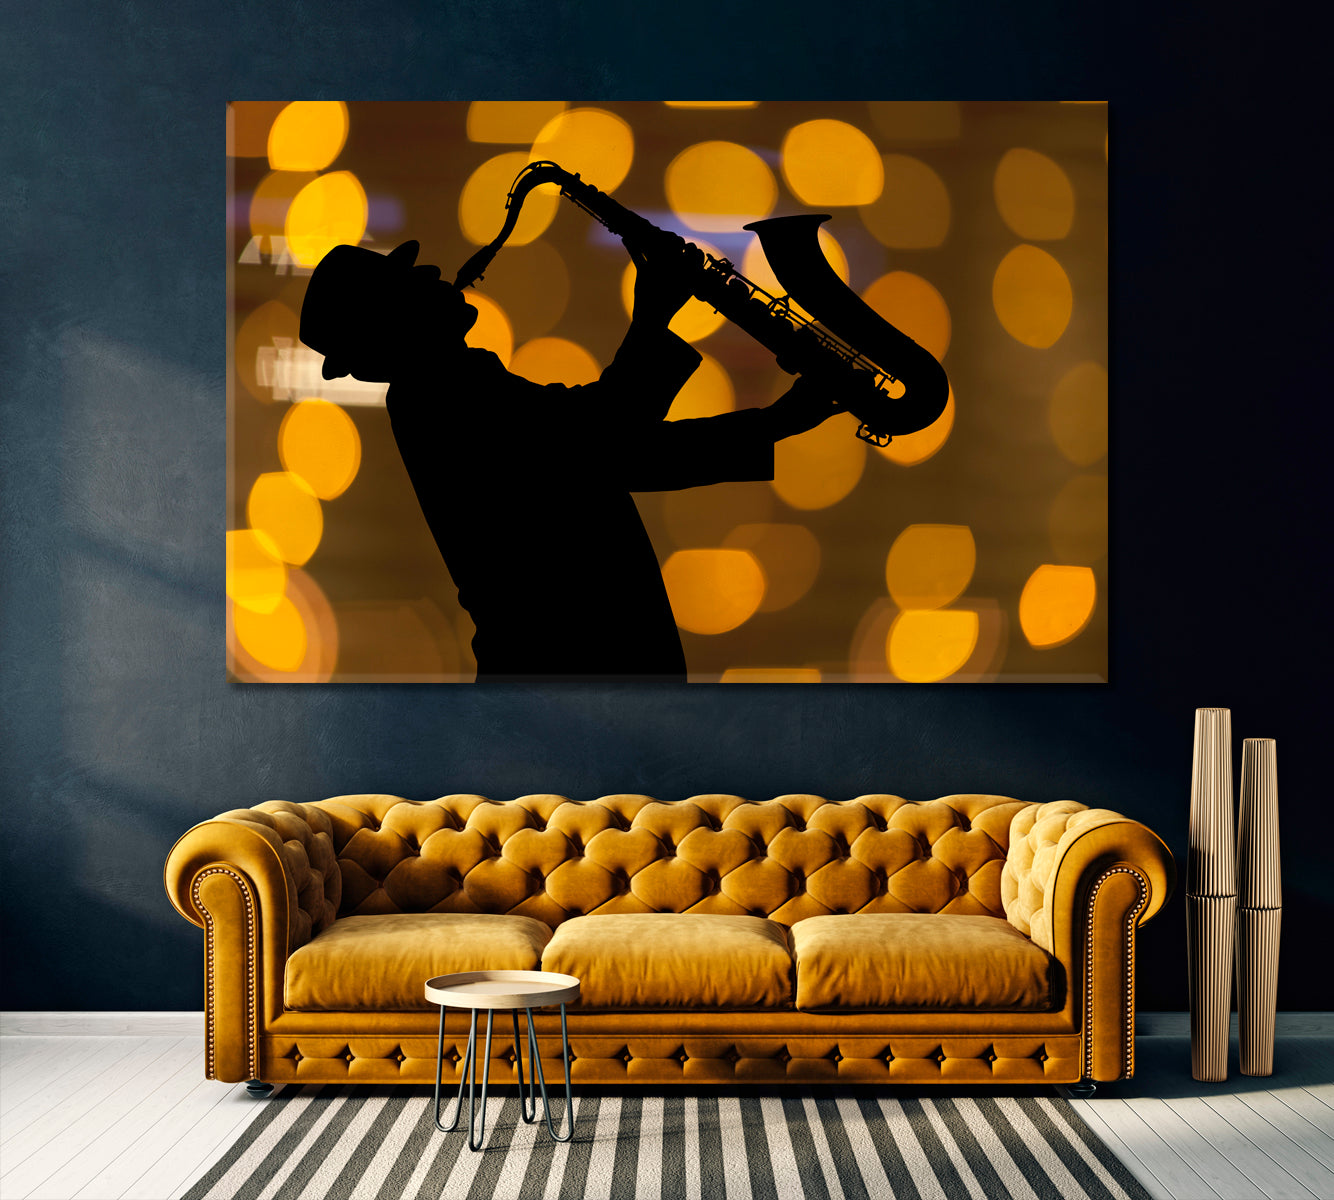 Saxophonist Against Beautiful Lights Canvas Print ArtLexy 1 Panel 24"x16" inches 